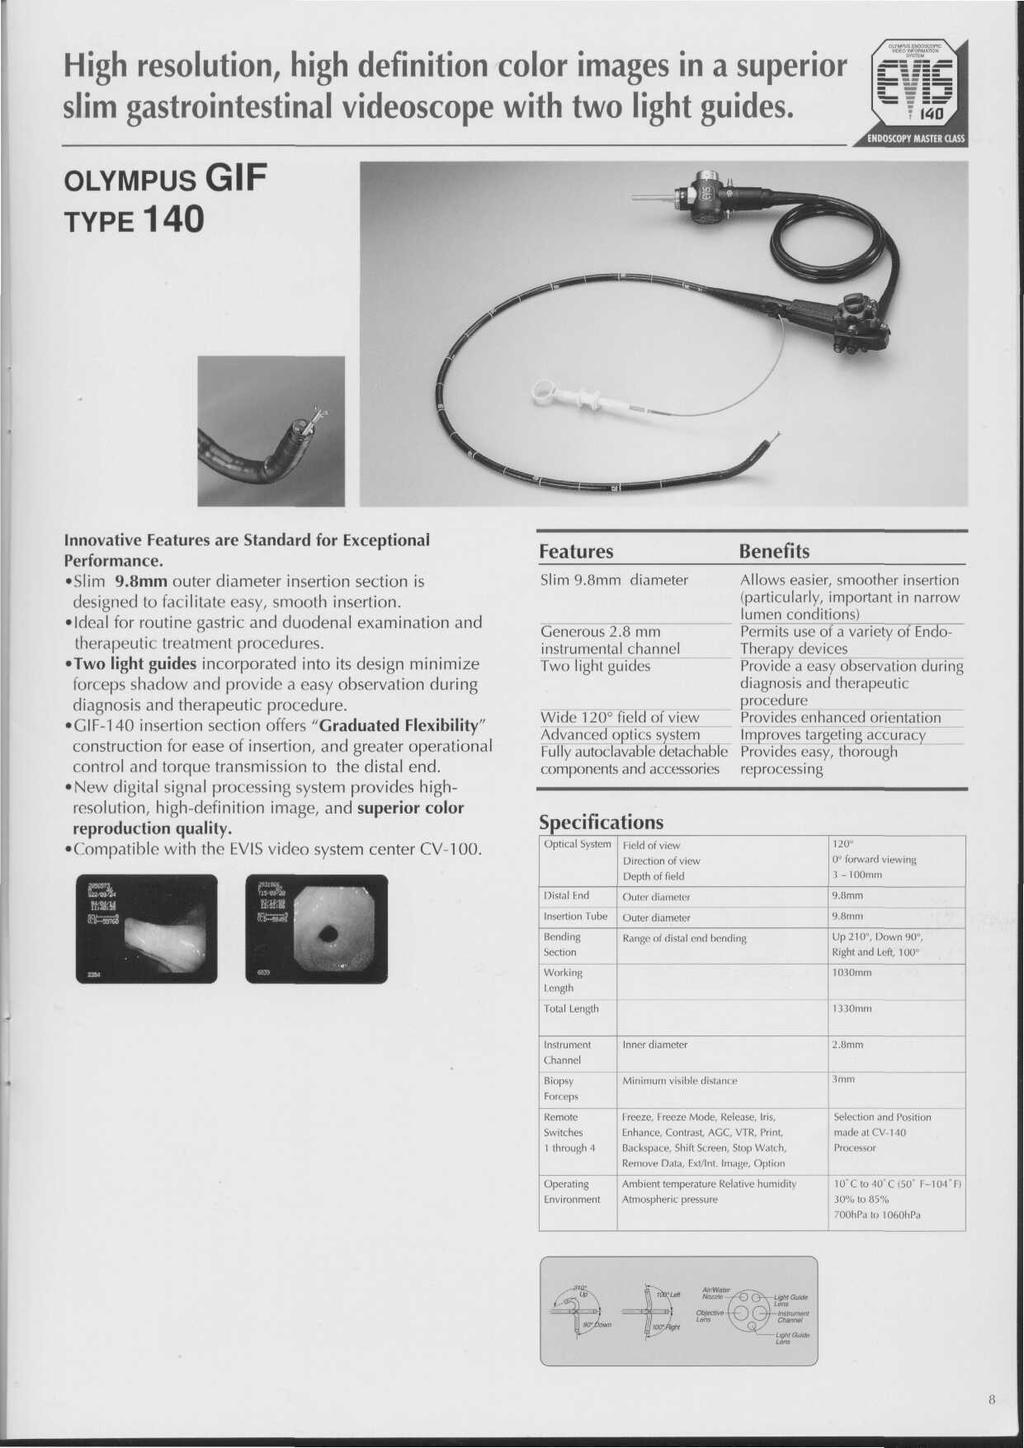 High resolution, high definition color images in a superior slim gastrointestinal videoscope with two light guides. OLYMPUS GIF TYPE 140 Innovative Features are Standard for Exceptional Performance.